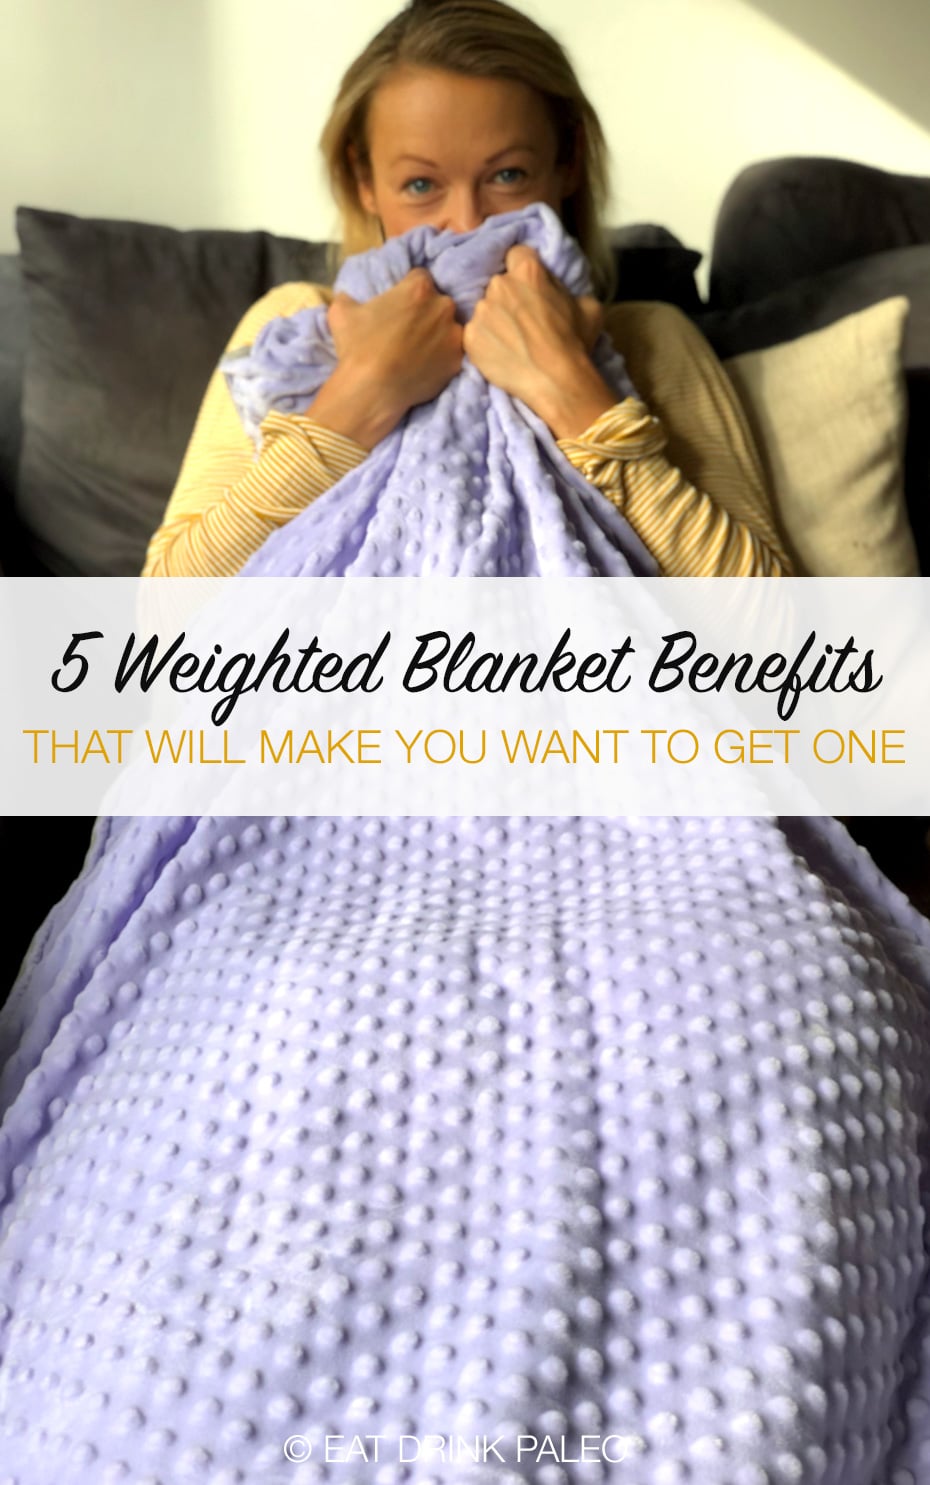 5 Benefits Of A Weighted Blanket For Health, Sleep And Anxiety